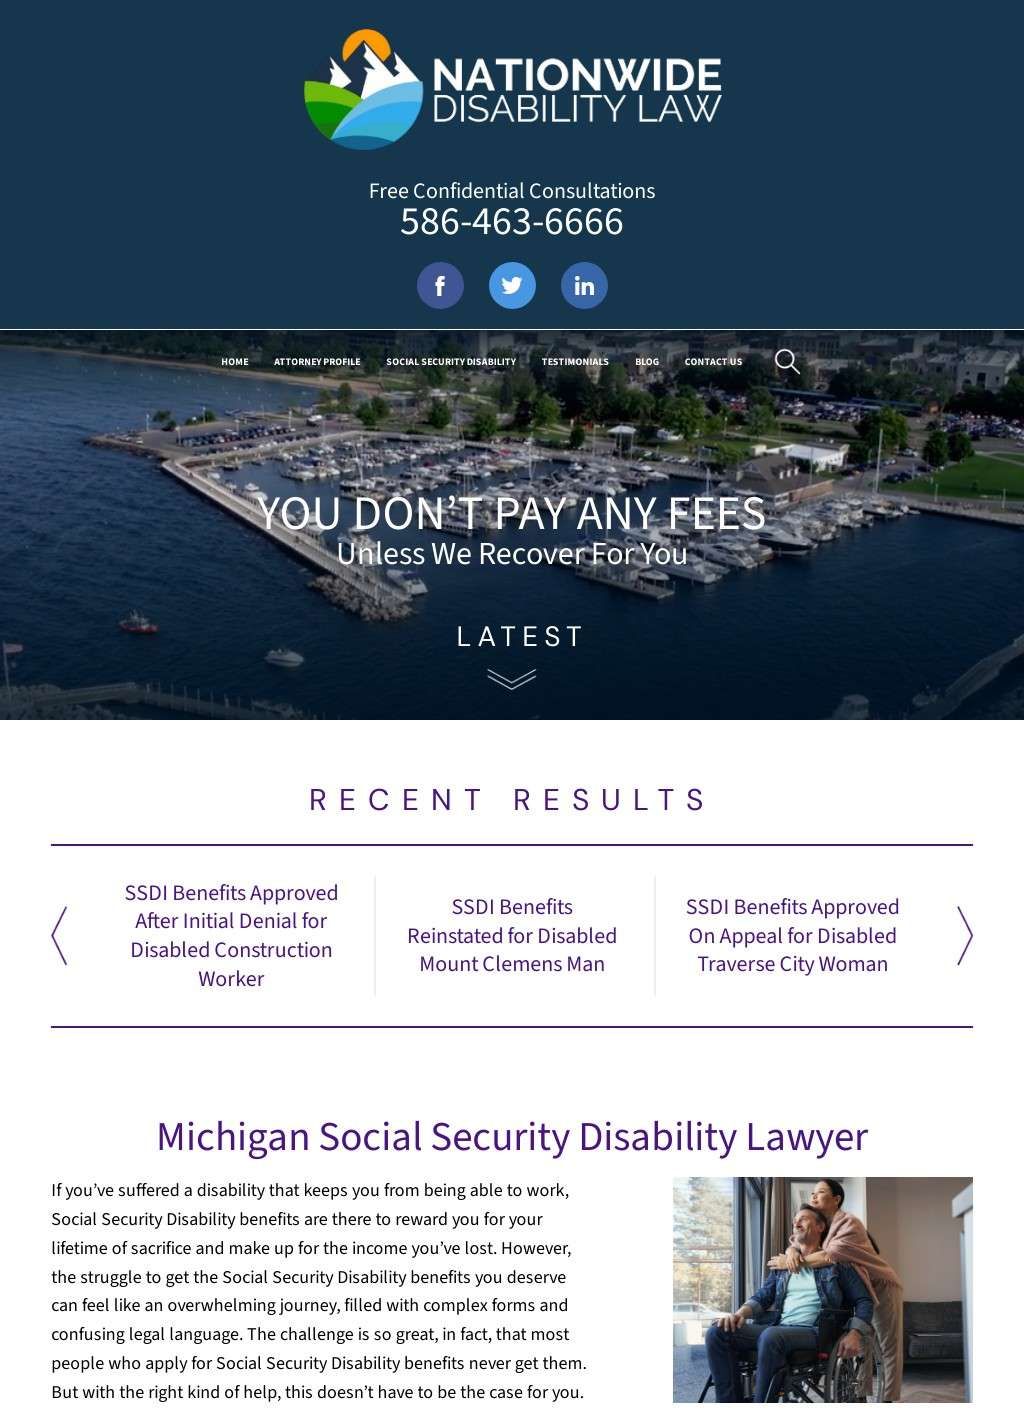 Michigan Social Security Disability Lawyer